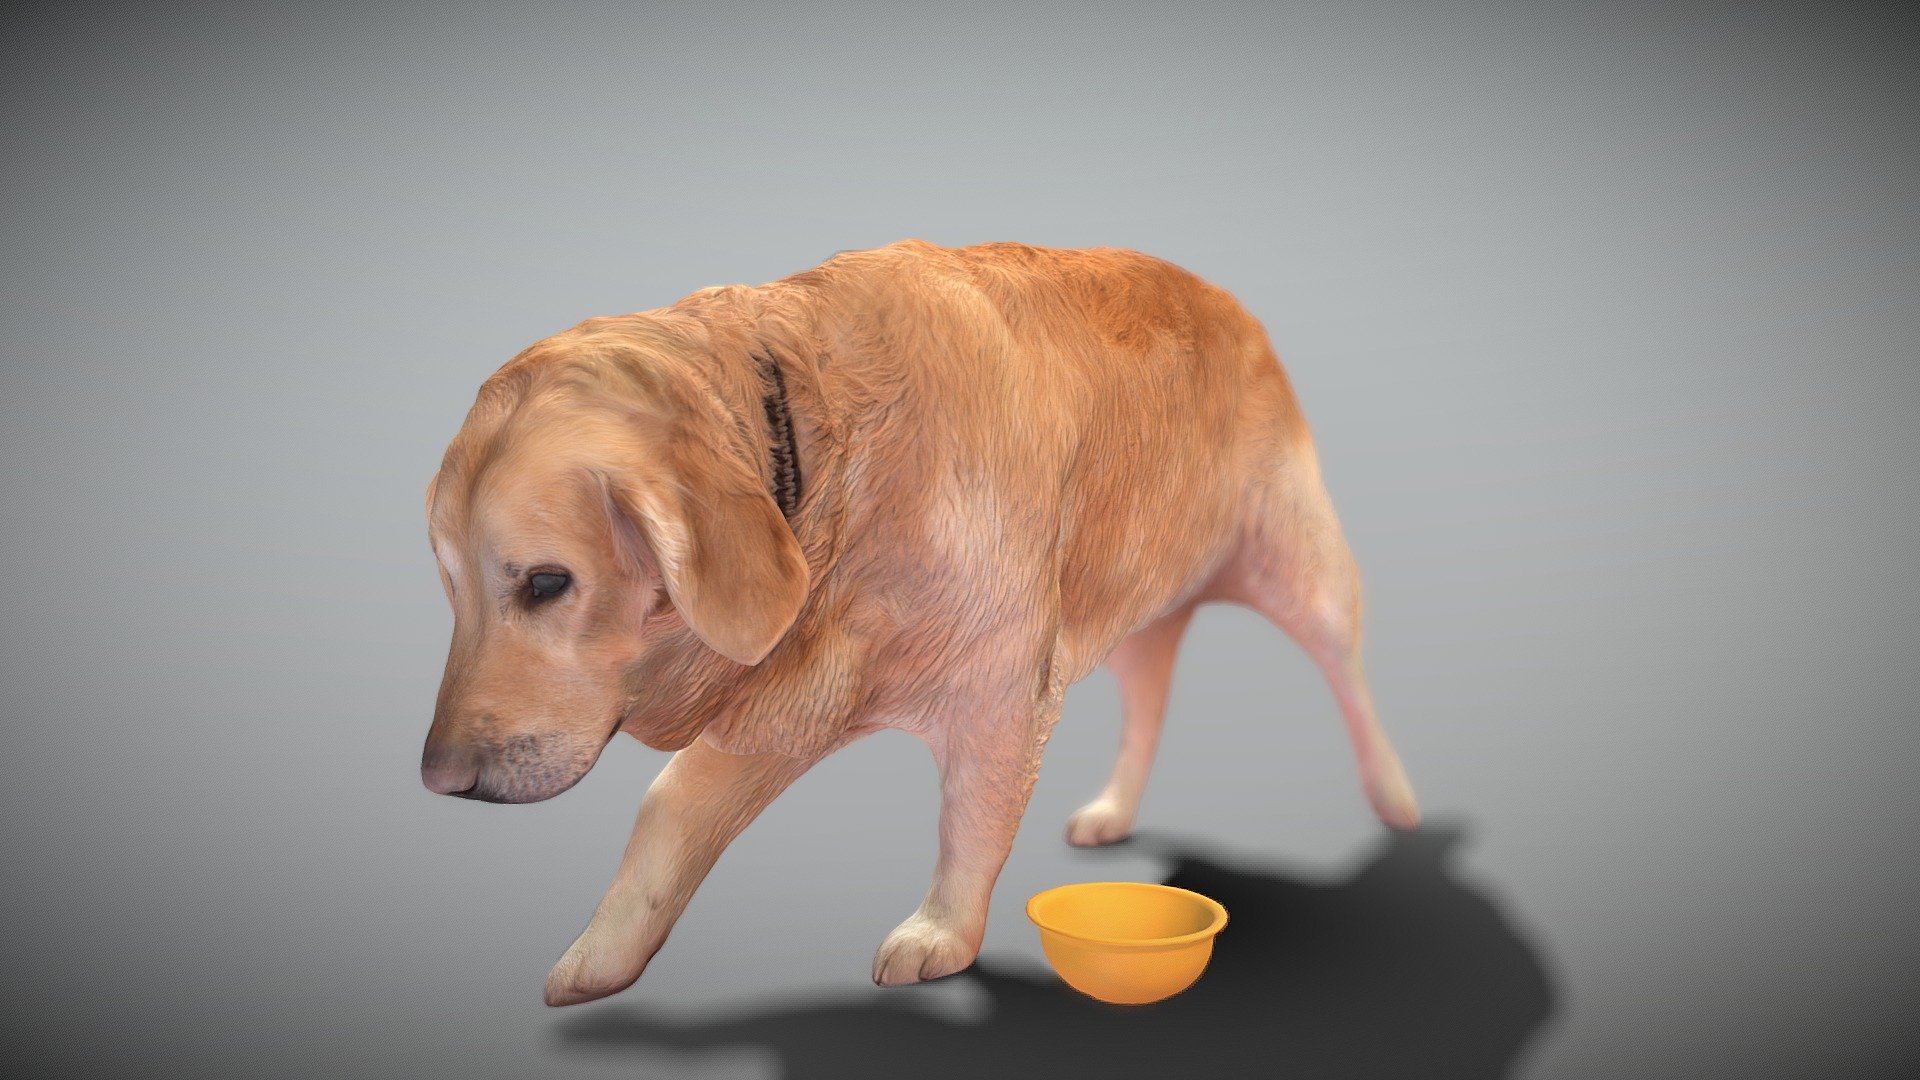 This is a true sized and highly detailed model of a young charming Golden retriever dog. It will add life and coziness to any architectural visualisation of houses, playgrounds, parques, urban landscapes, etc. This model is suitable for game engine integration, VR/AR content, etc.

Technical specifications:




digital double 3d scan model

150k &amp; 30k triangles | double triangulated

high-poly model (.ztl tool with 5 subdivisions) clean and retopologized automatically via ZRemesher

sufficiently clean

PBR textures 8K resolution: Diffuse, Normal, Specular maps

non-overlapping UV map

no extra plugins are required for this model

Download package includes a Cinema 4D project file with Redshift shader, OBJ, FBX, STL files, which are applicable for 3ds Max, Maya, Unreal Engine, Unity, Blender, etc. All the textures you will find in the “Tex” folder, included into the main archive.

3D EVERYTHING

Stand with Ukraine! - Golden retriever dog 33 - Buy Royalty Free 3D model by deep3dstudio 3d model